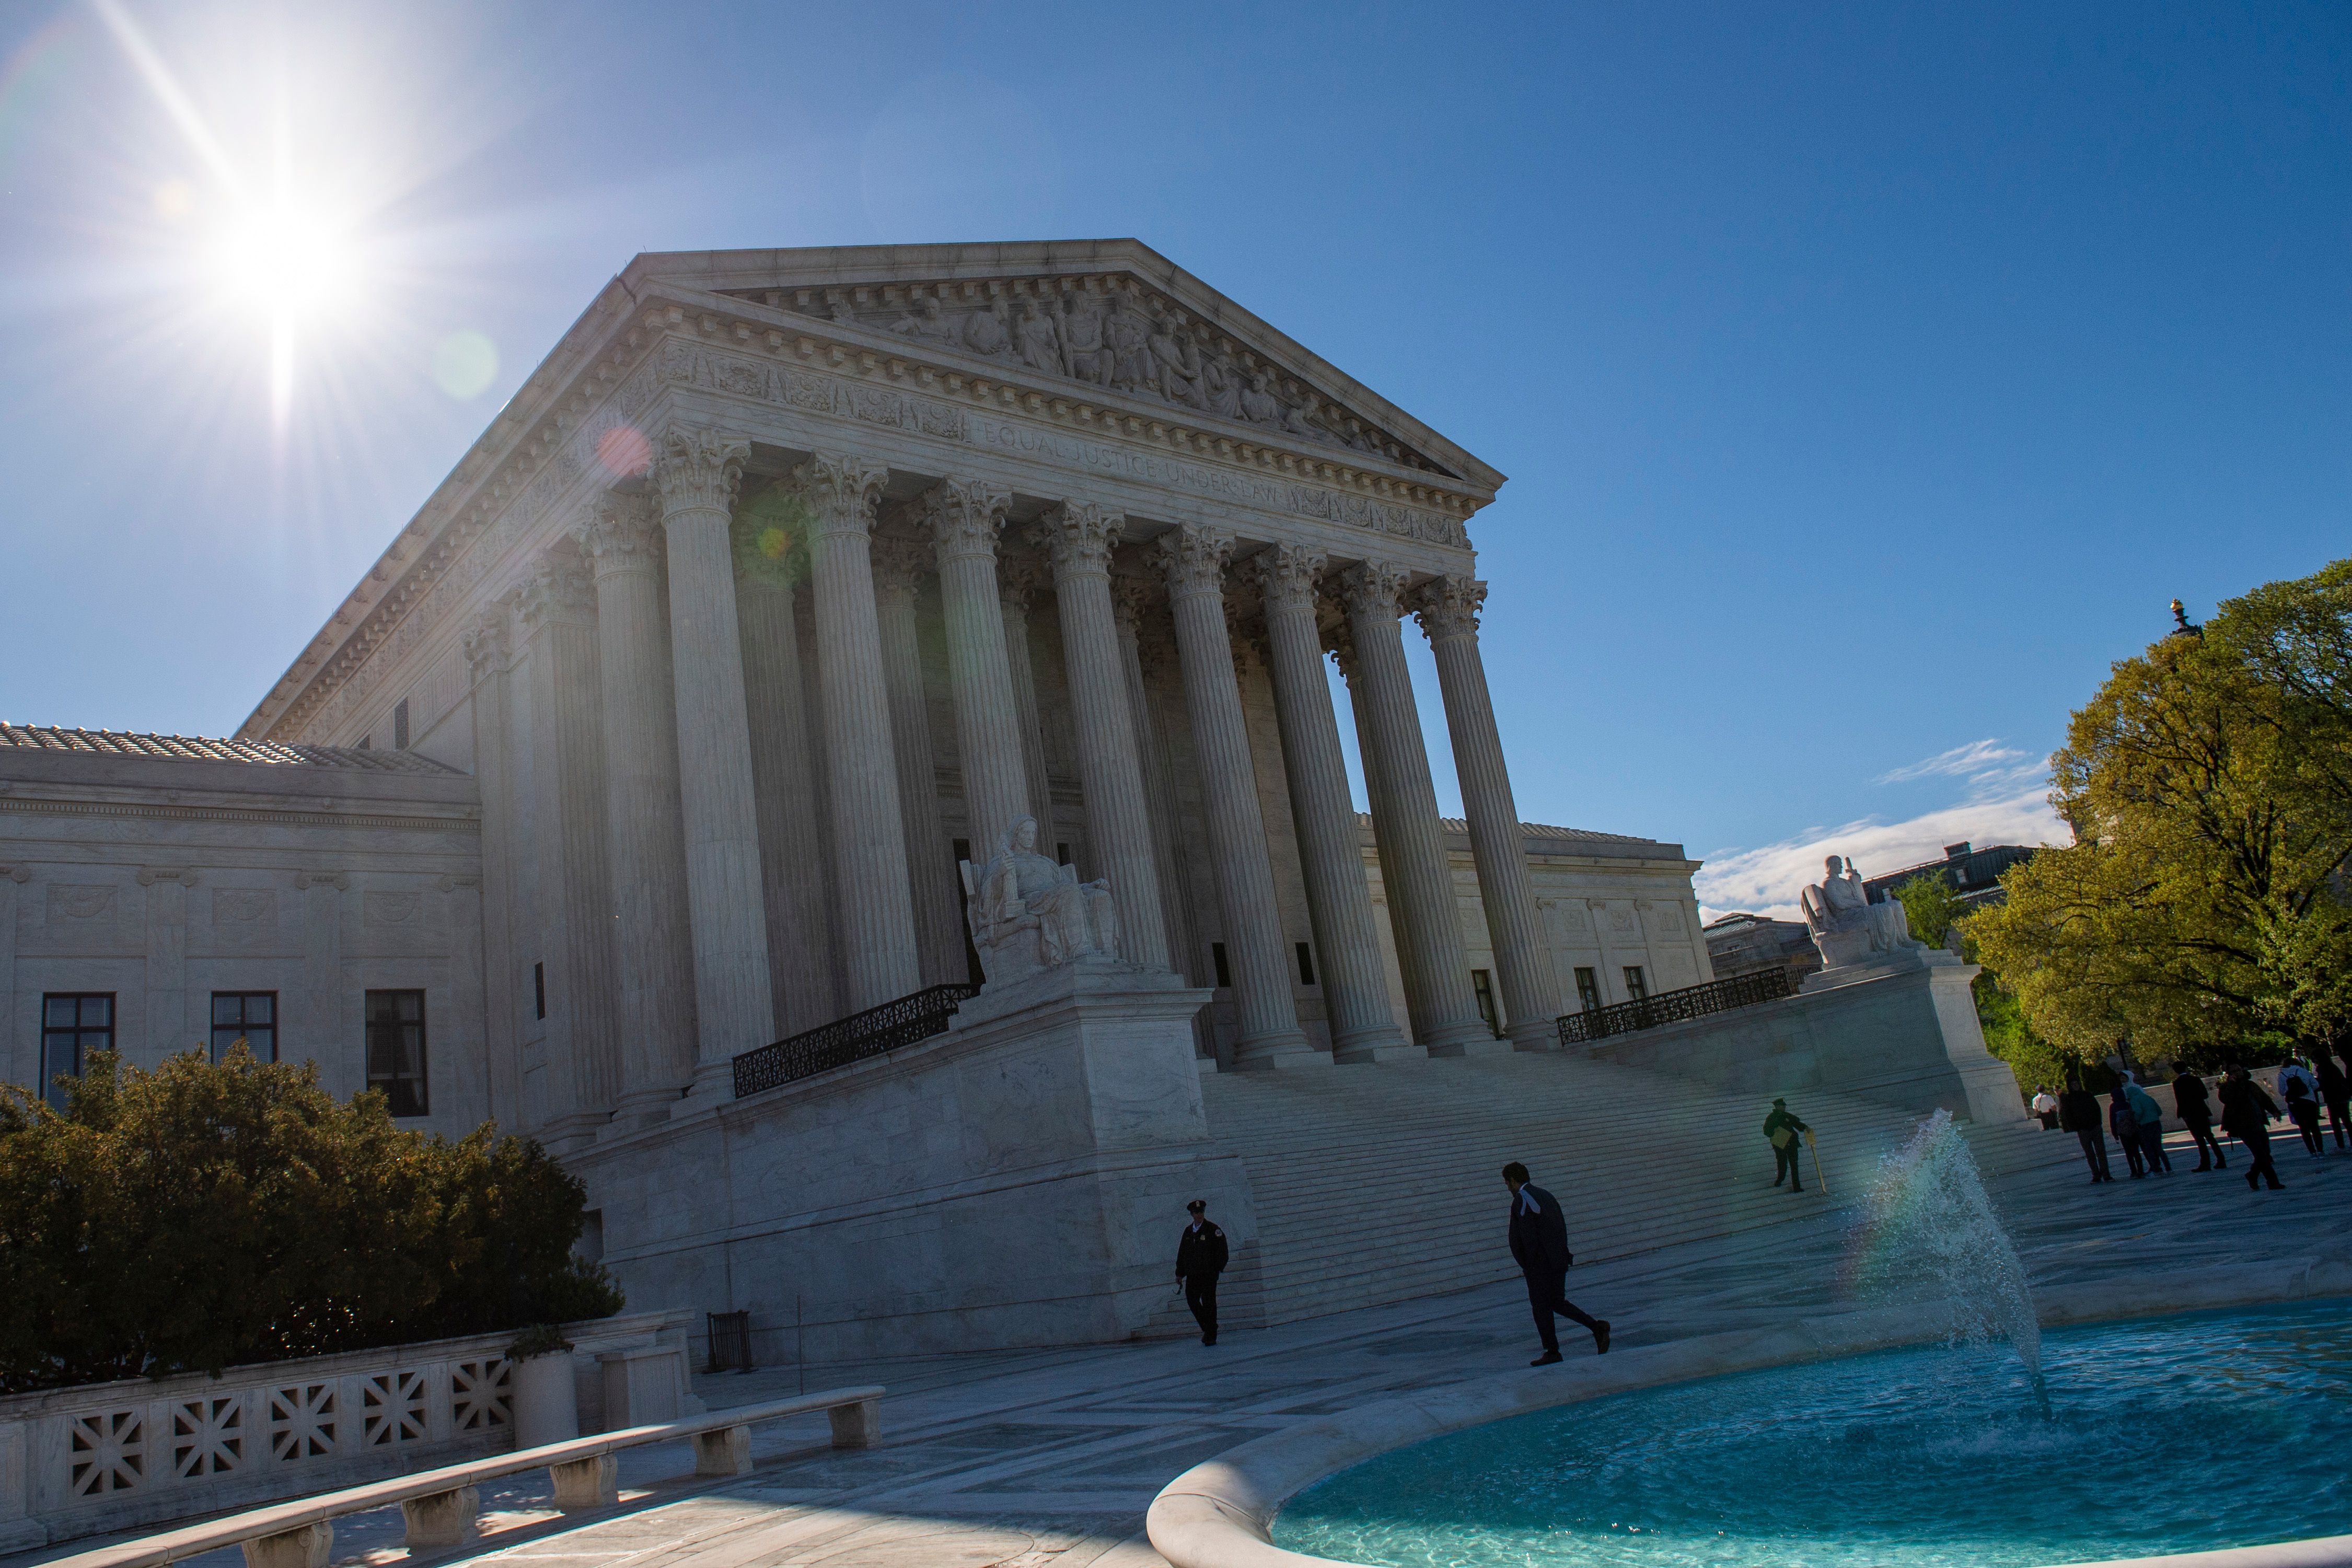 The Supreme Court as seen on April 15, 2019 (Eric Baradat/AFP/Getty Images)